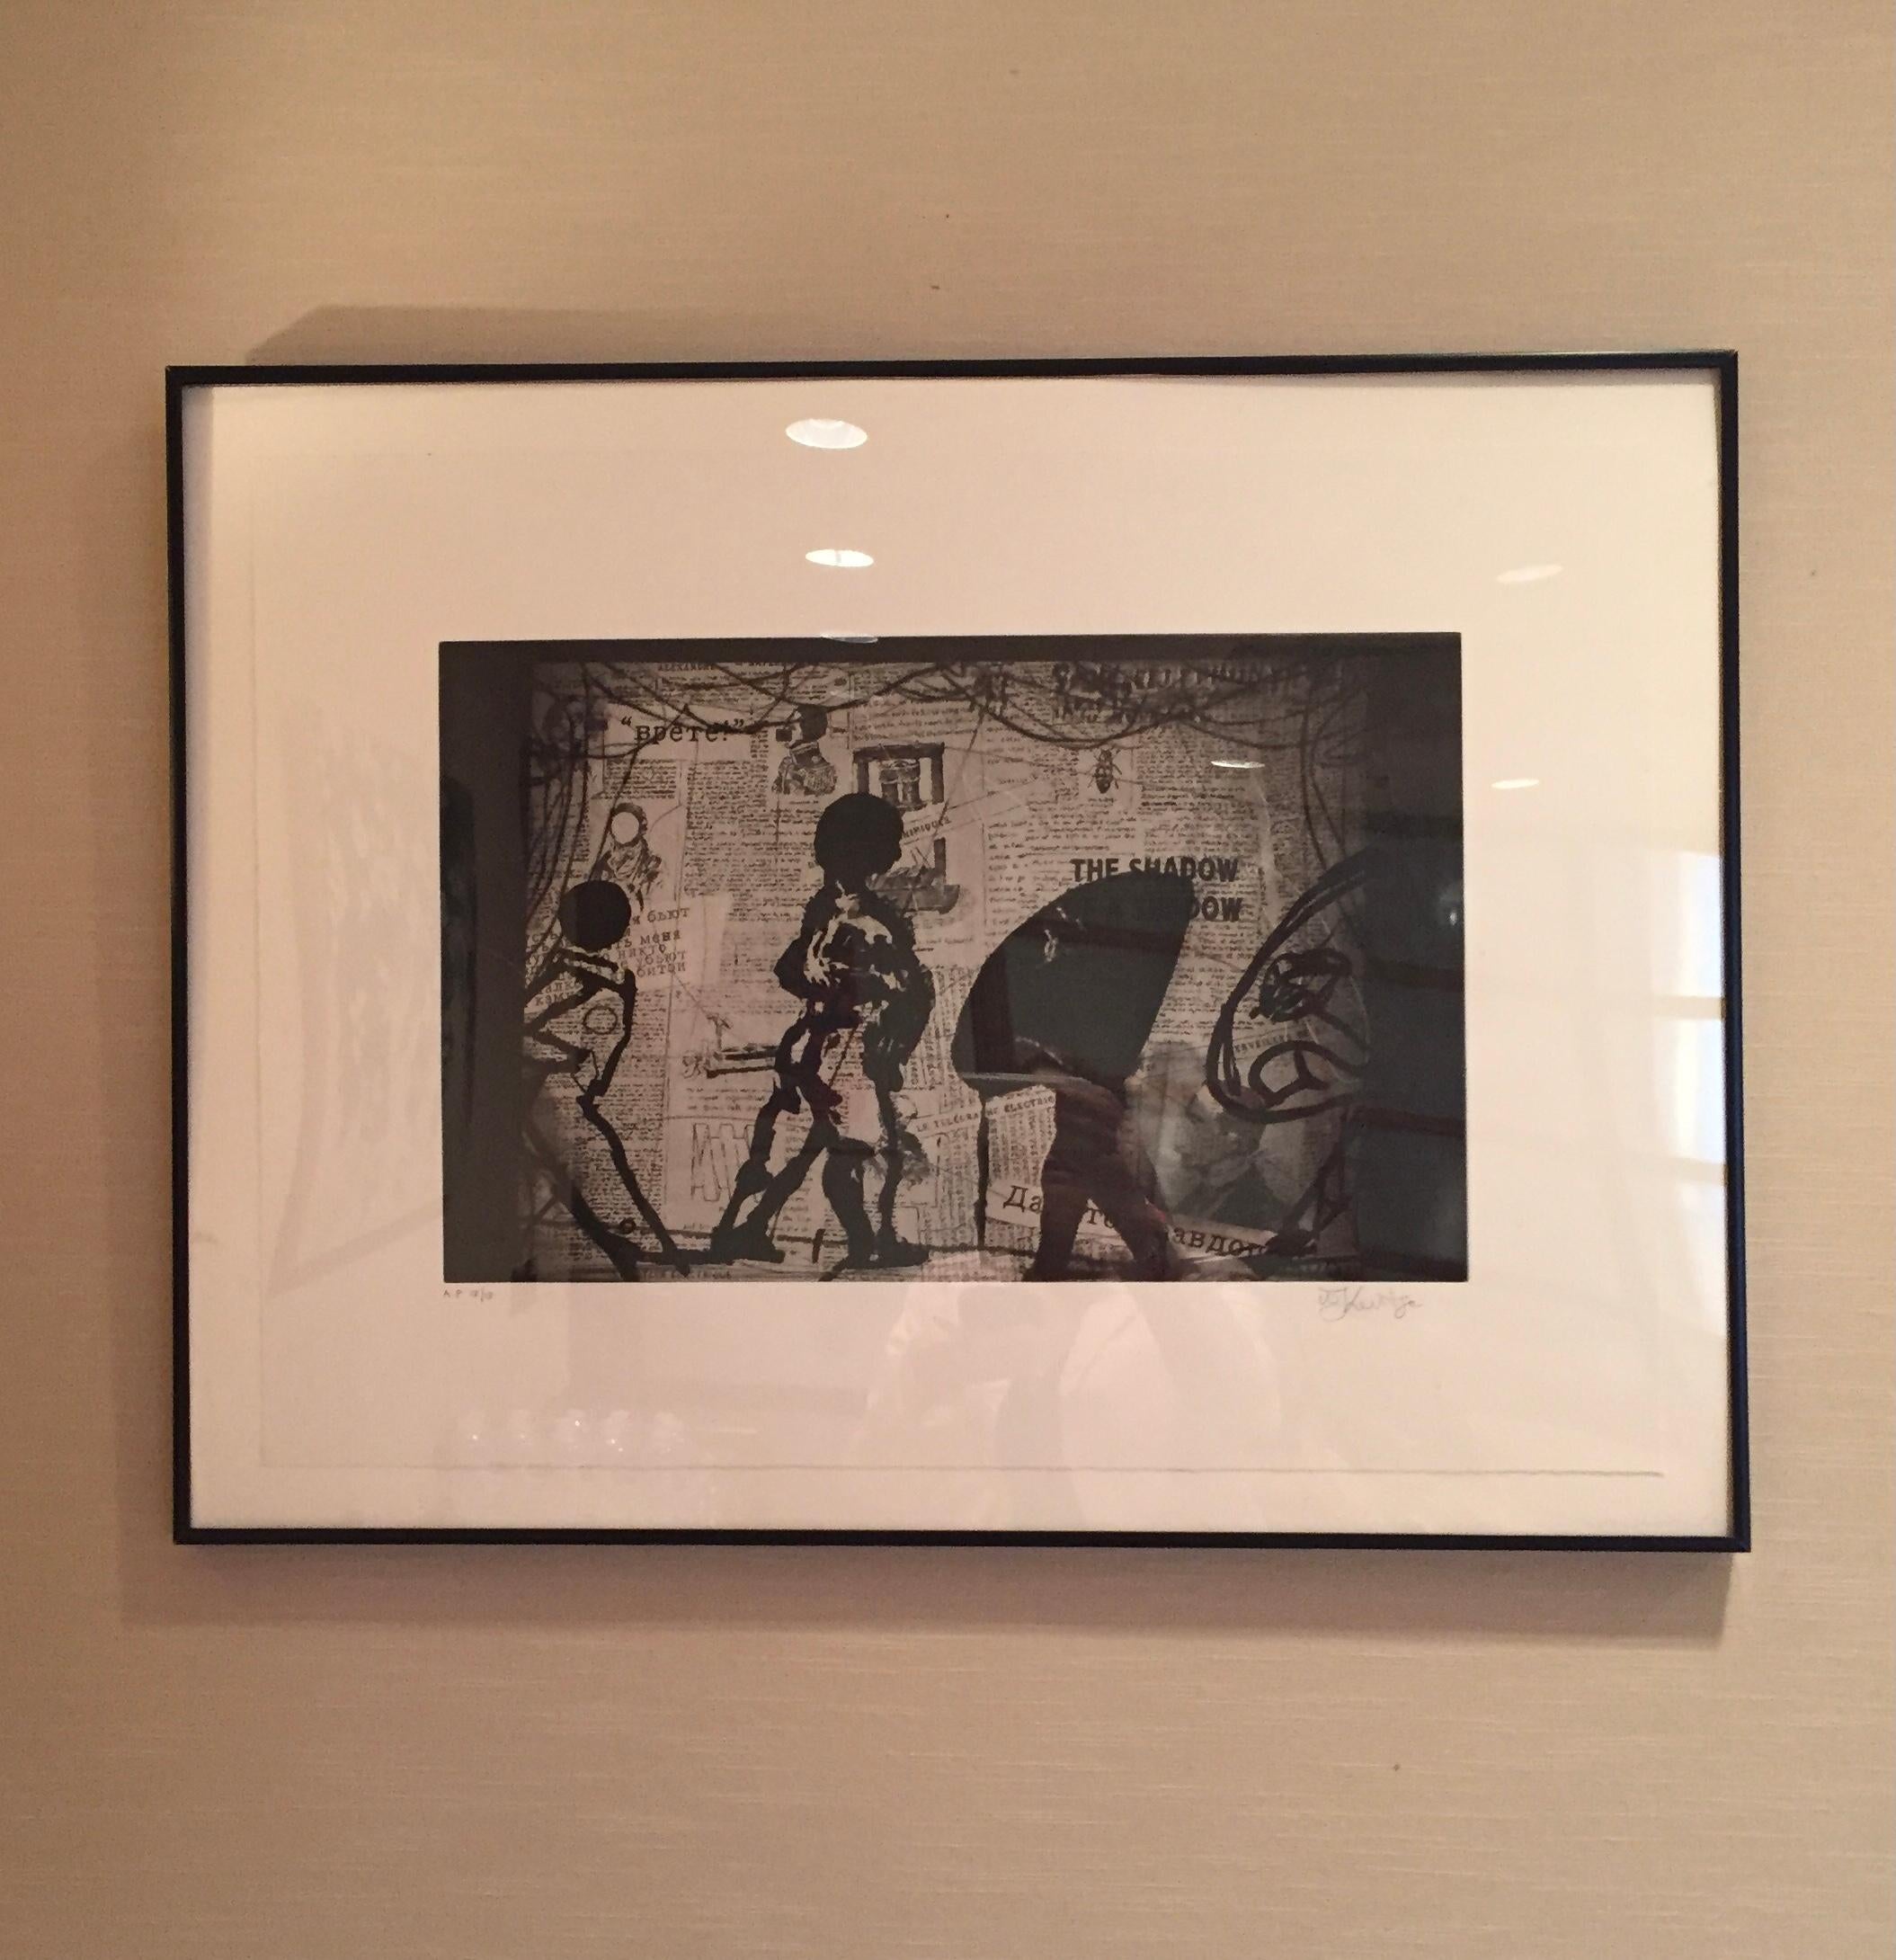 THE NOSE, photogravure, aquatint and drypoint, signed and numbered, Ed. of 70
 - Contemporary Print by William Kentridge